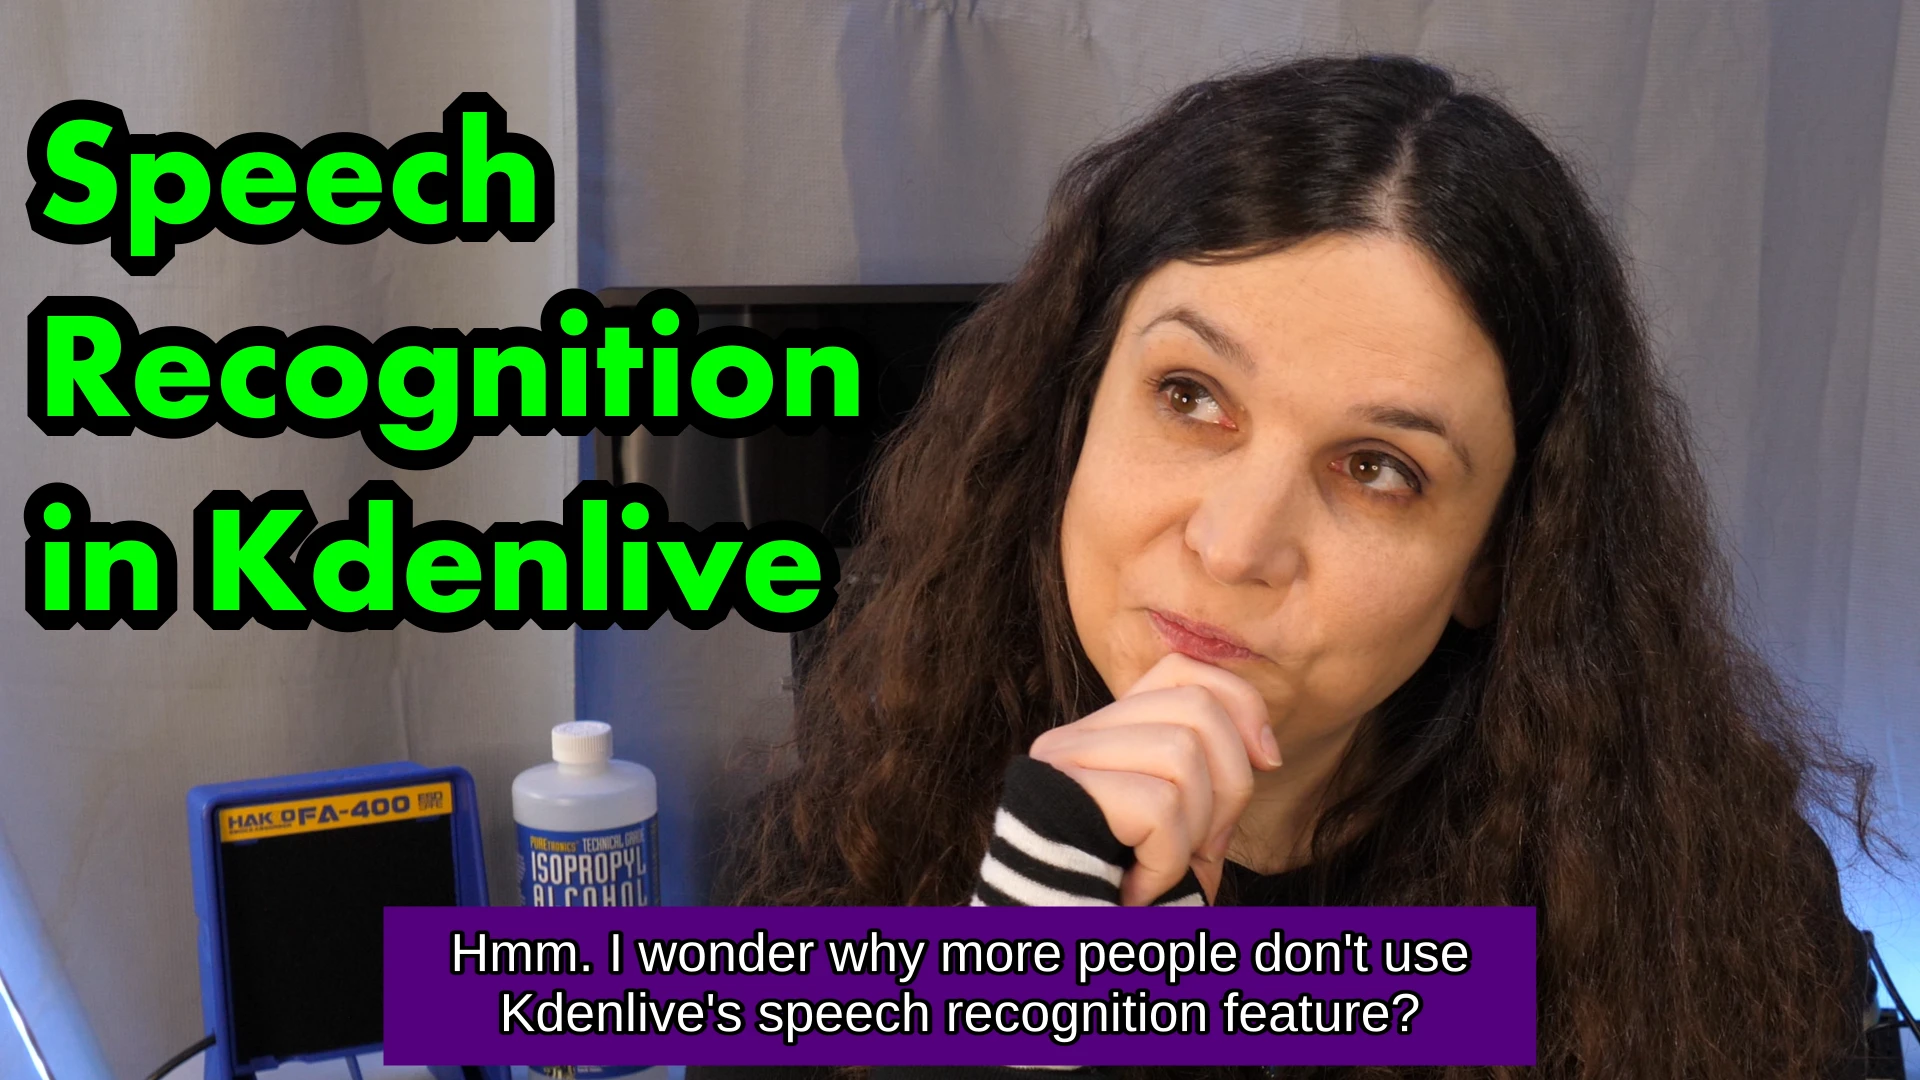 A white woman is making a "thinking" face. Superimposed over the image are the words "Speech Recognition in Kdenlive", and at the bottom of the image, it says "Hmm. I wonder why more people don't use Kdenlive's speech recognition feature?"